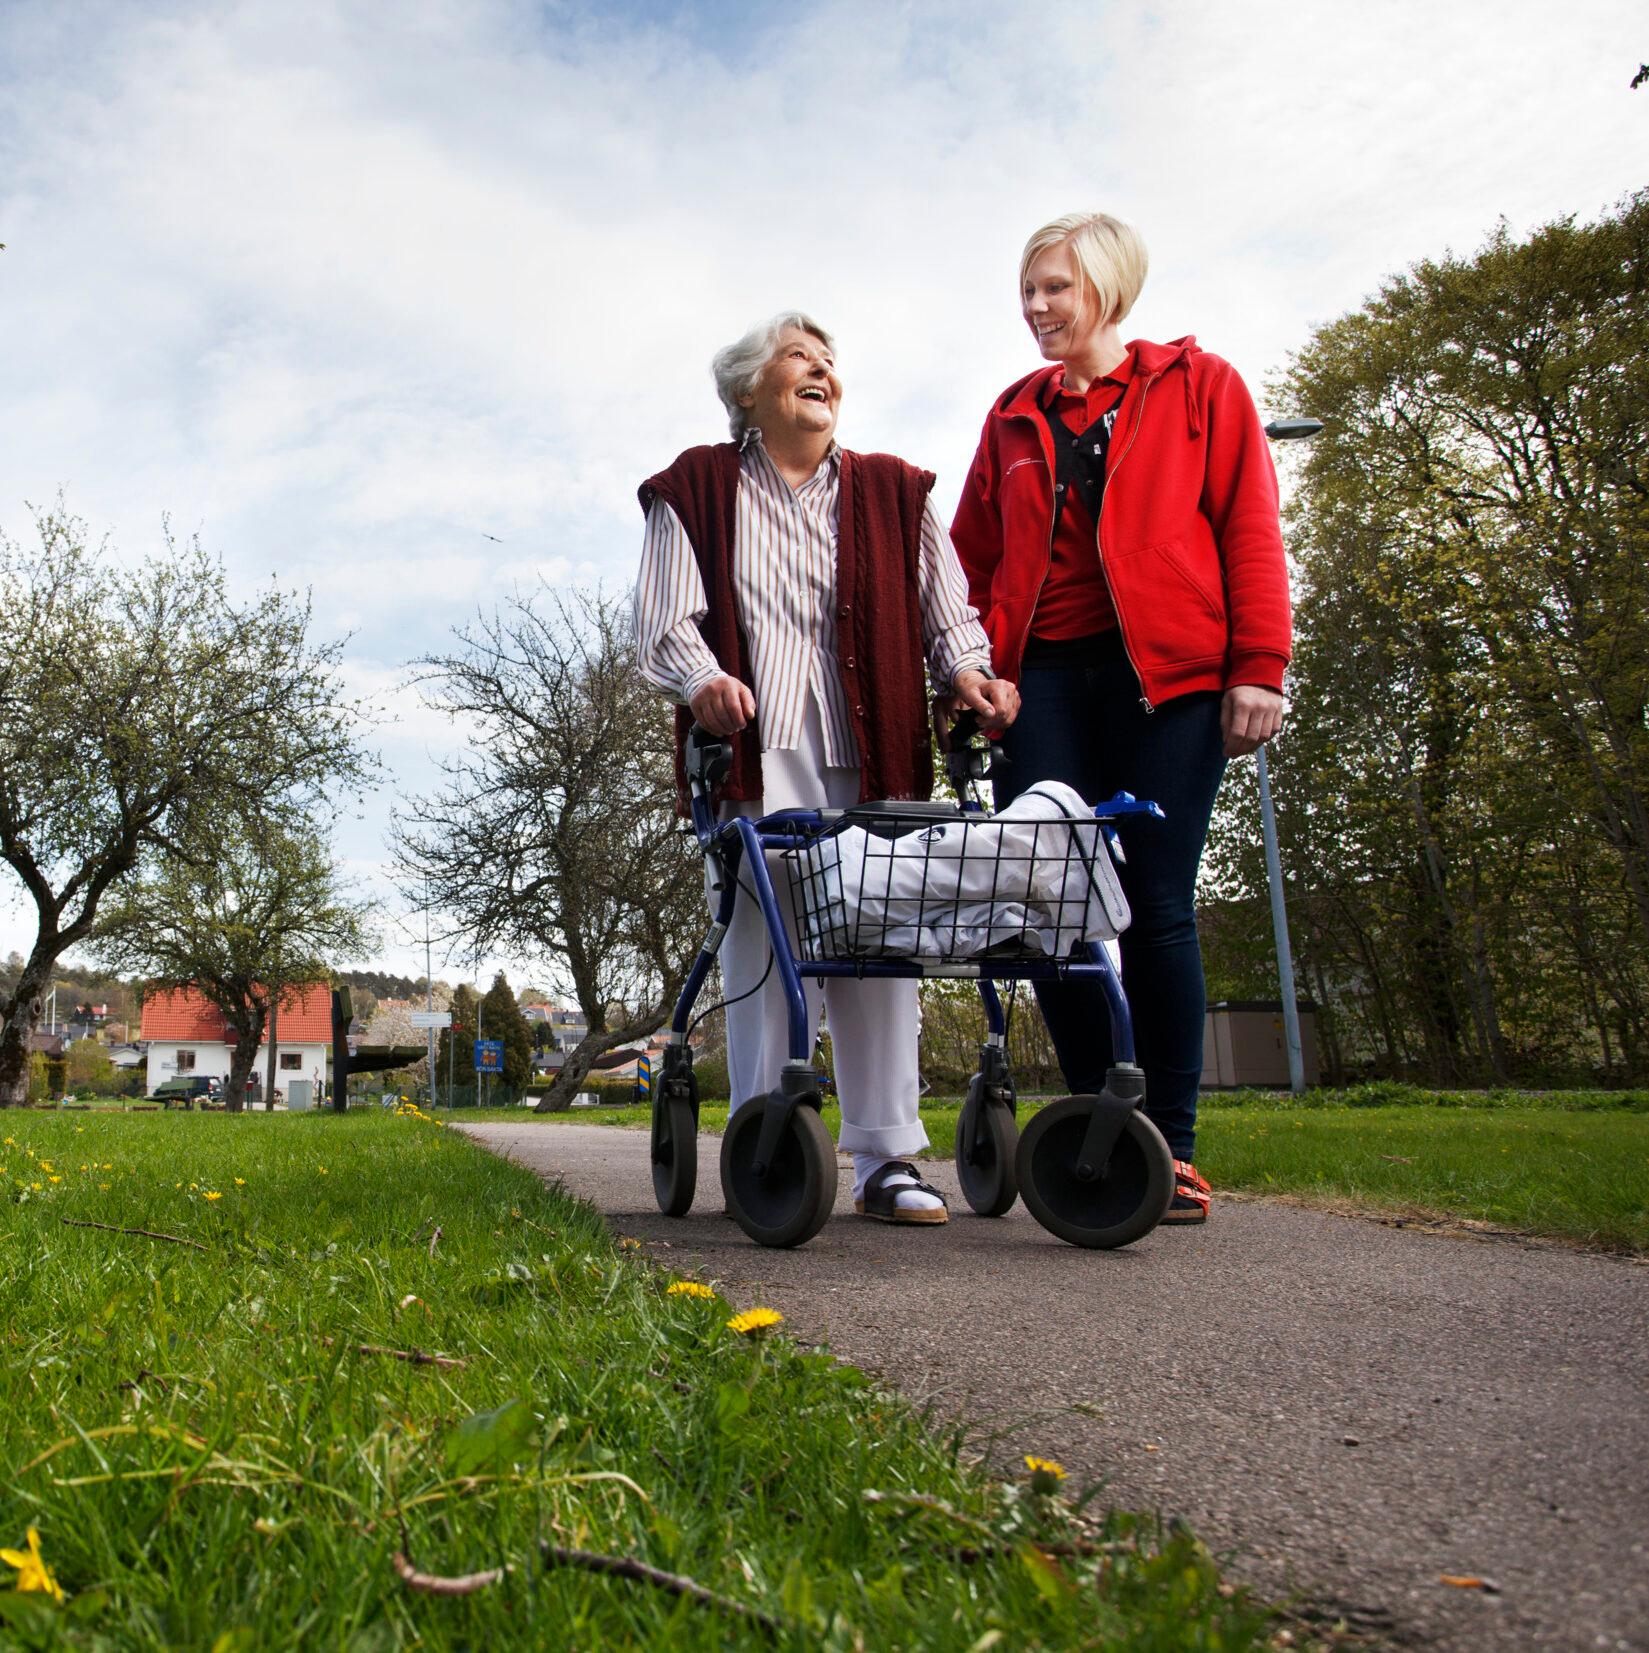 An elderly woman in a park walking with a walking frame together with a younger woman.